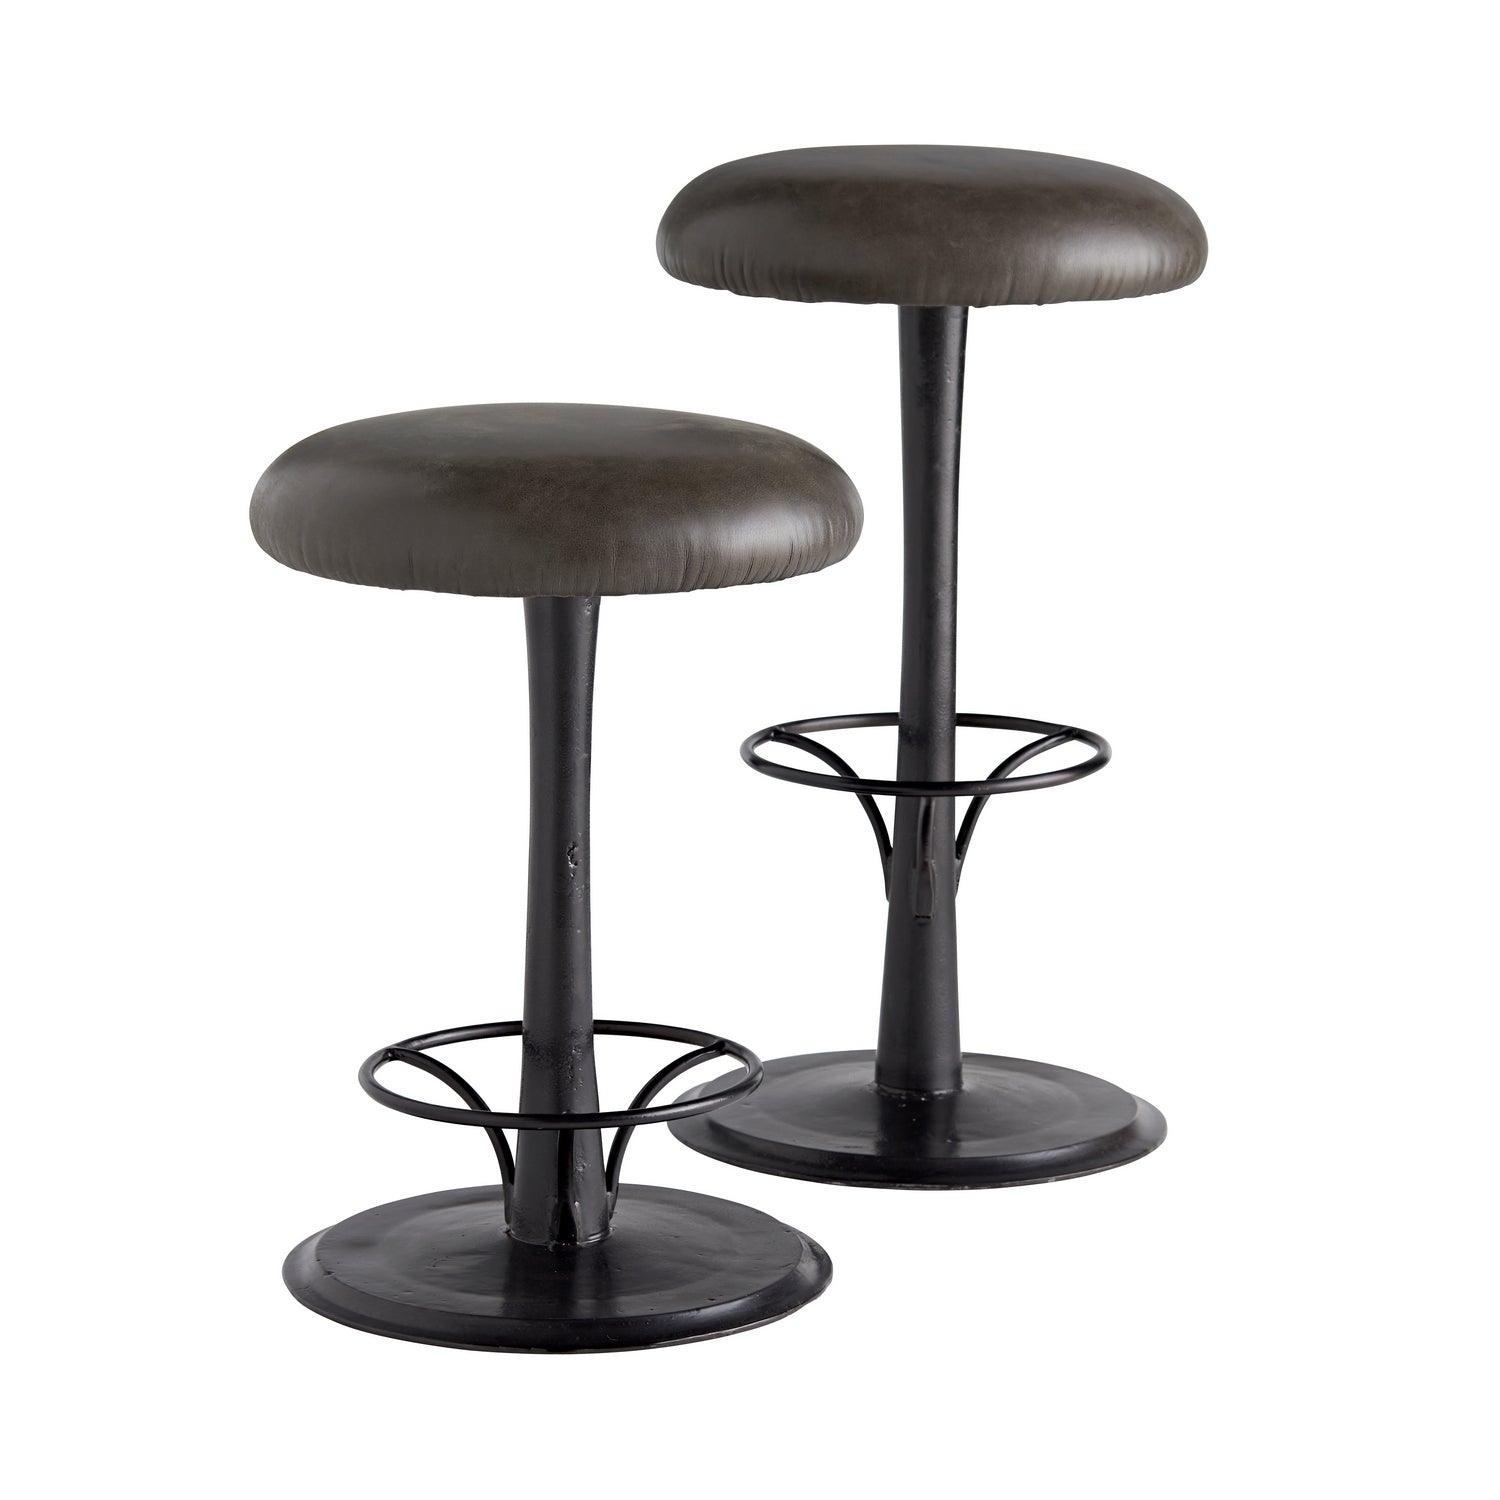 Bar Stool from the Holden collection in Graphite finish